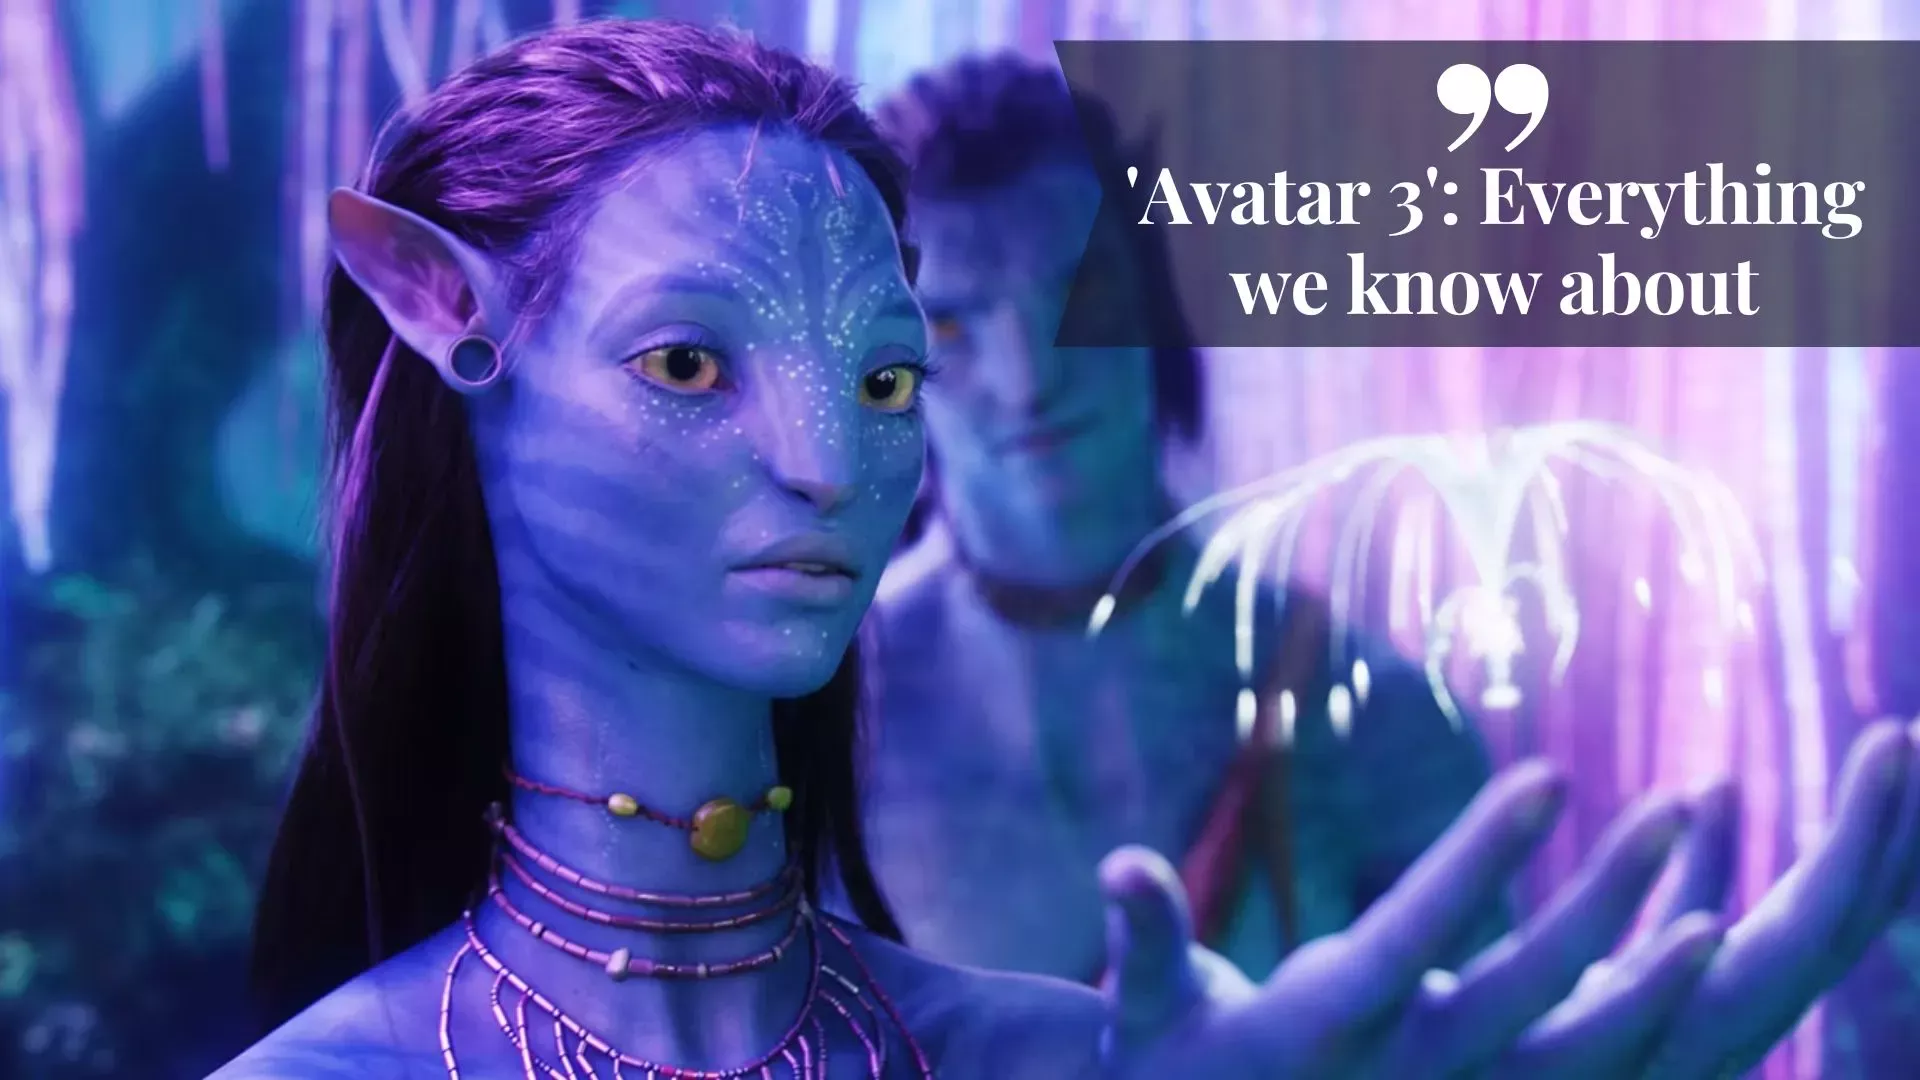 'Avatar 3': Everything we know about (Image credit: 20th Century Studios)